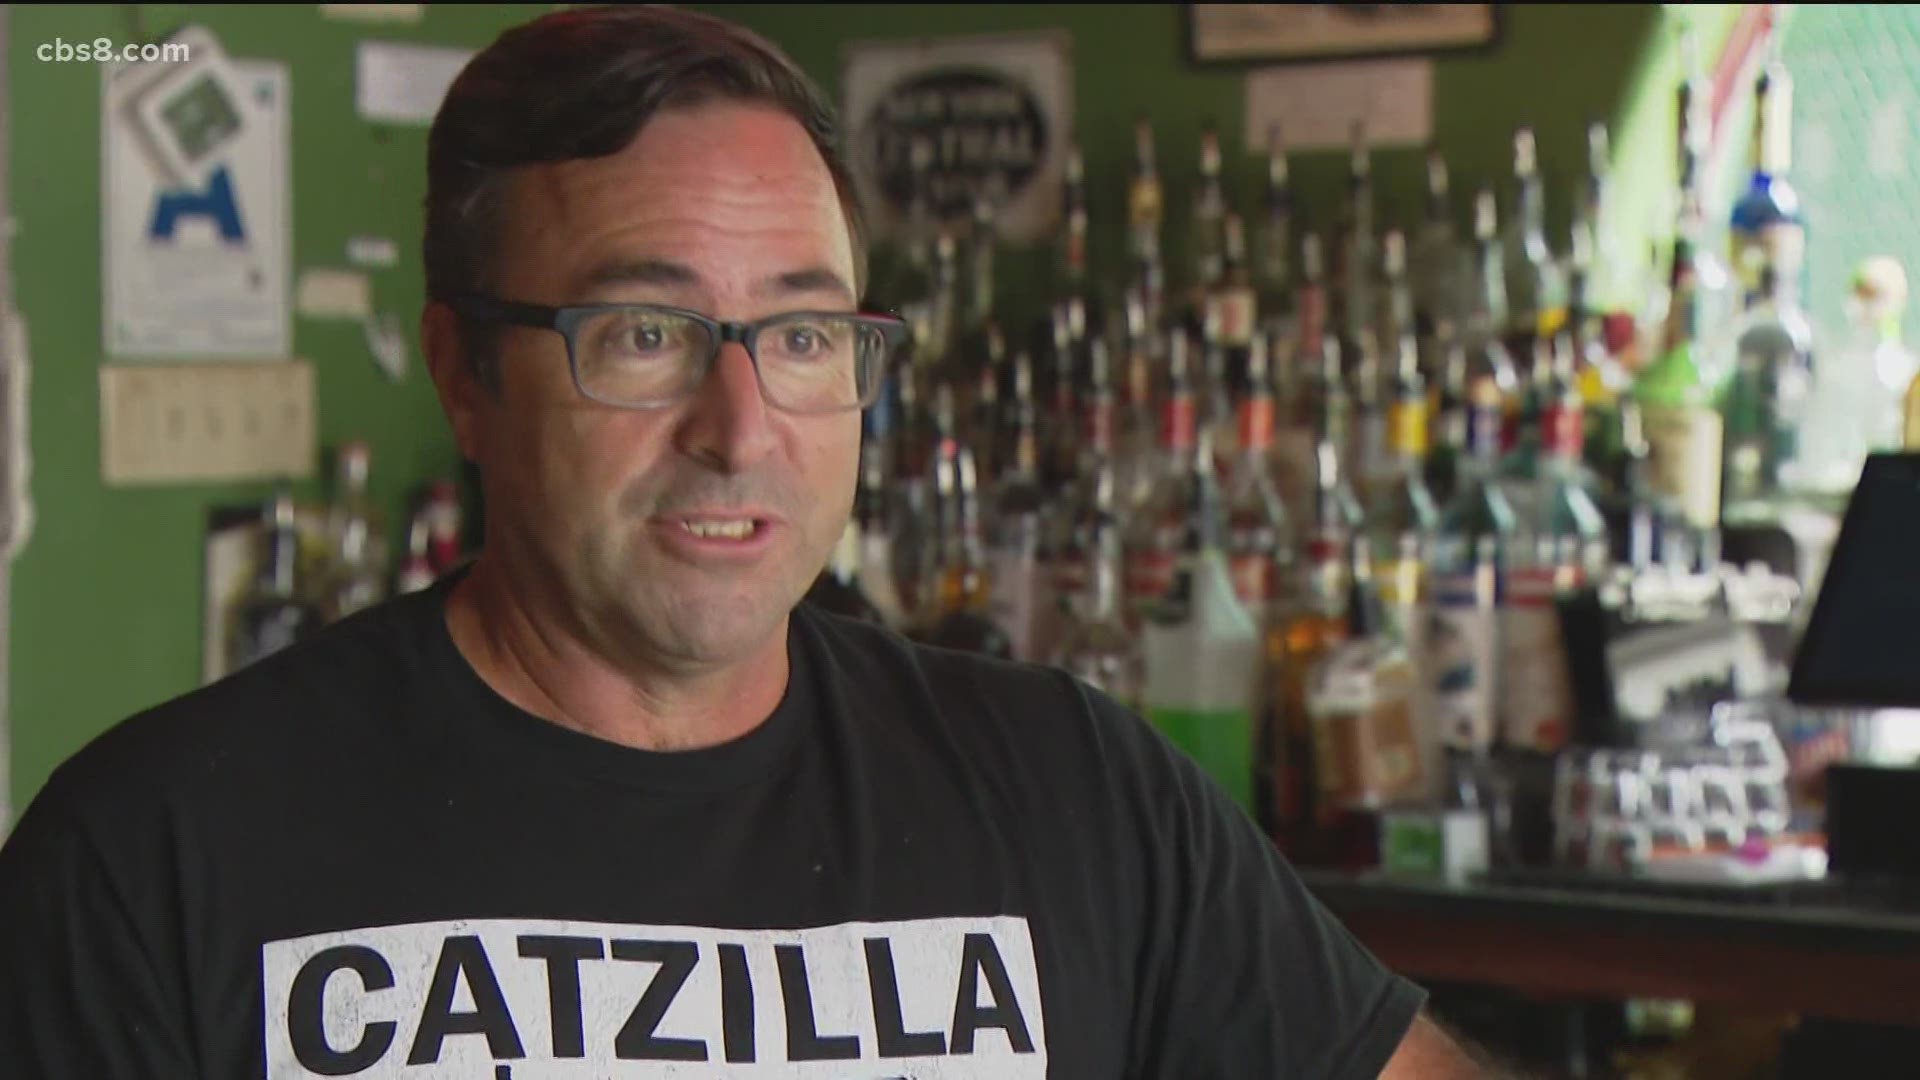 Bar owners in Kearny Mesa said they are worried about having to close again.